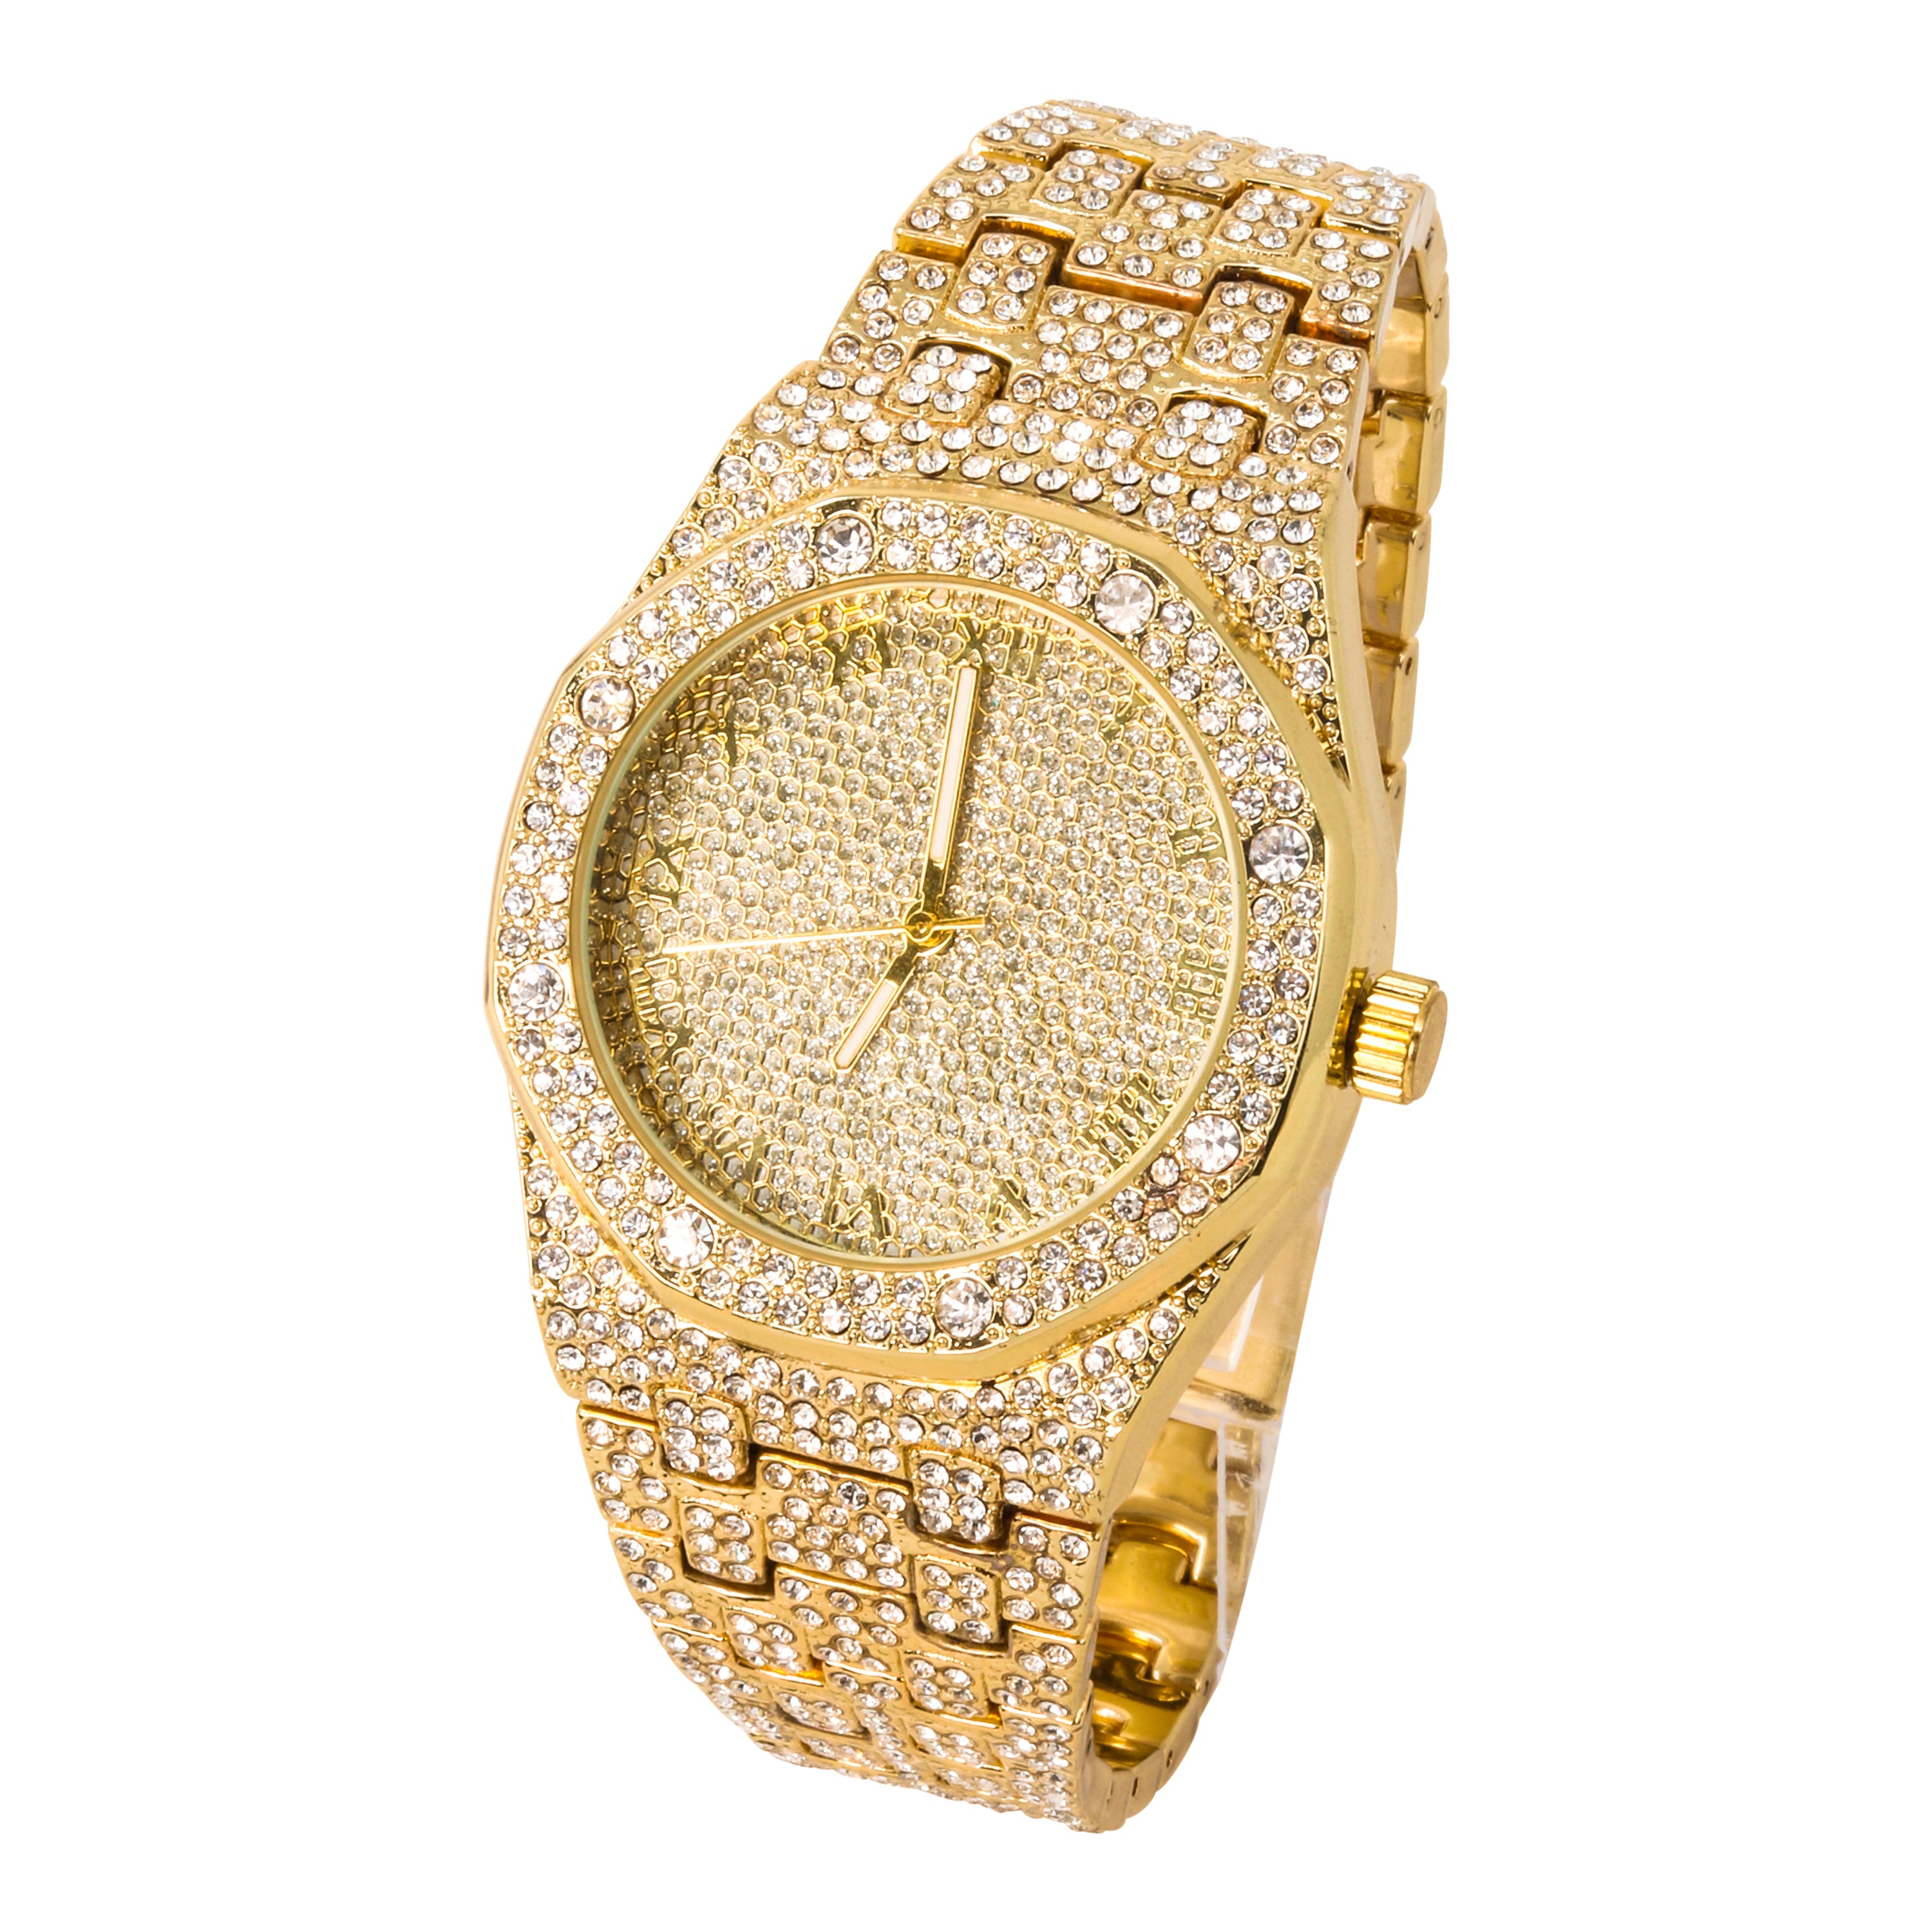 Men's 40mm Gold Octagon Bezel - "Fully Iced Out Watch"